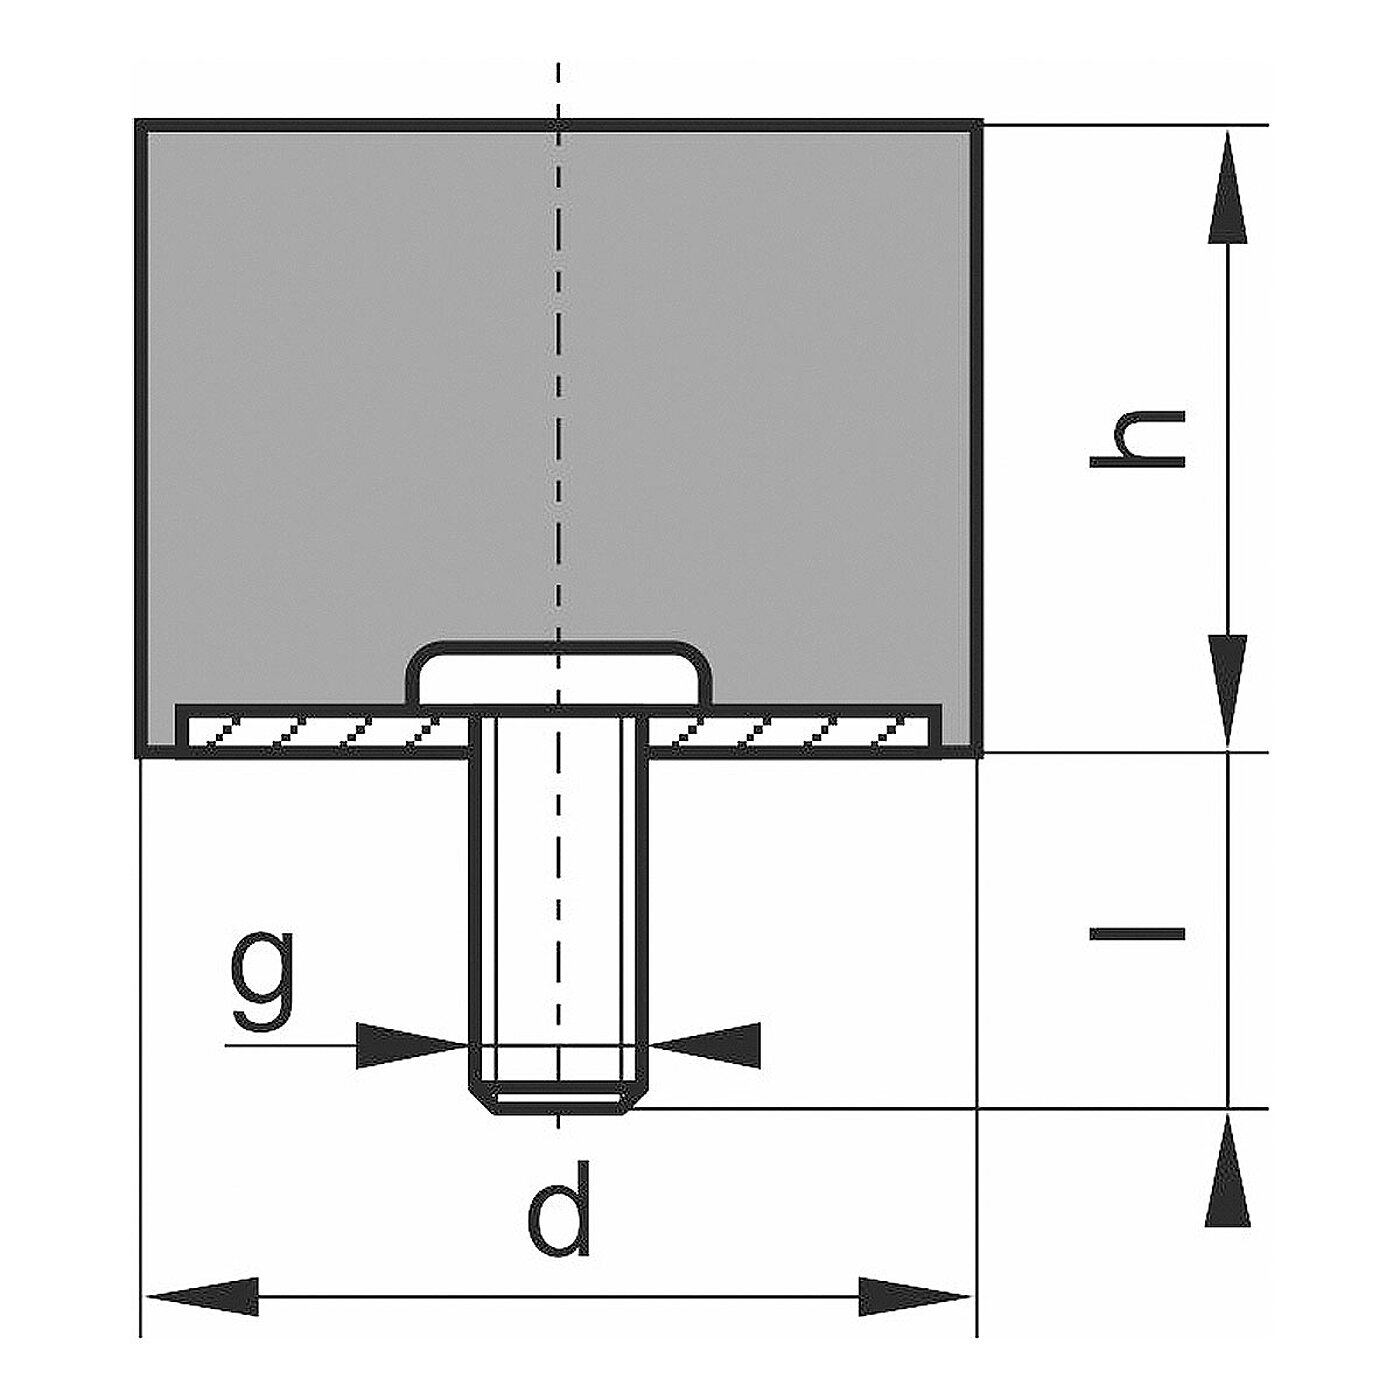 schematic drawing of a rubber-metal bearing with outer thread on one side and a cylindrical elastomer corpus